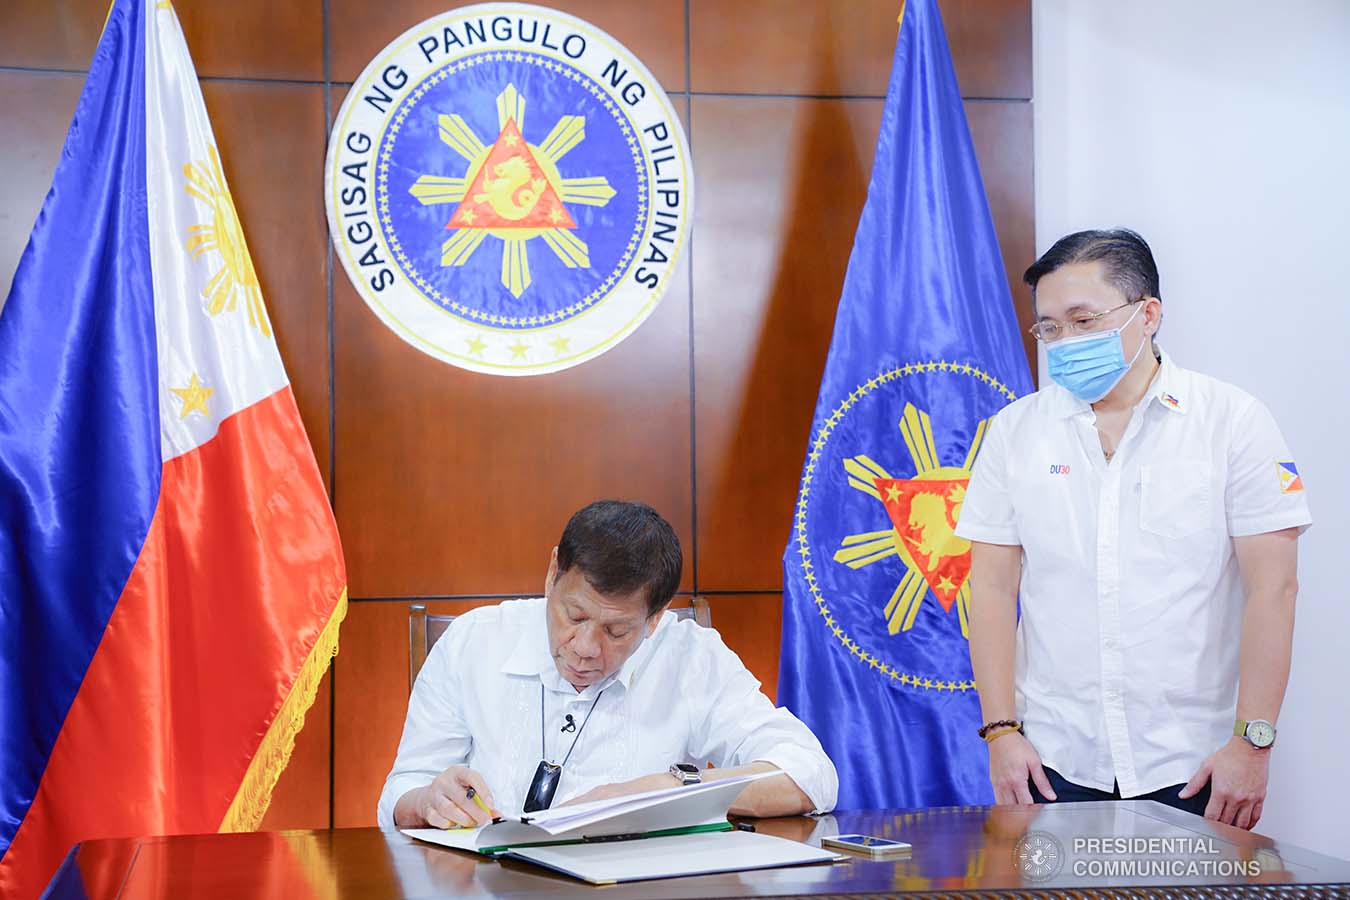 President Rodrigo Roa Duterte signs into law the establishment of the National Academy of Sports during a ceremony at the Presidential Guest House in Panacan, Davao City on June 9, 2020. With the President is Senator Christopher "Bong" Go. JOEY DALUMPINES/PRESIDENTIAL PHOTO